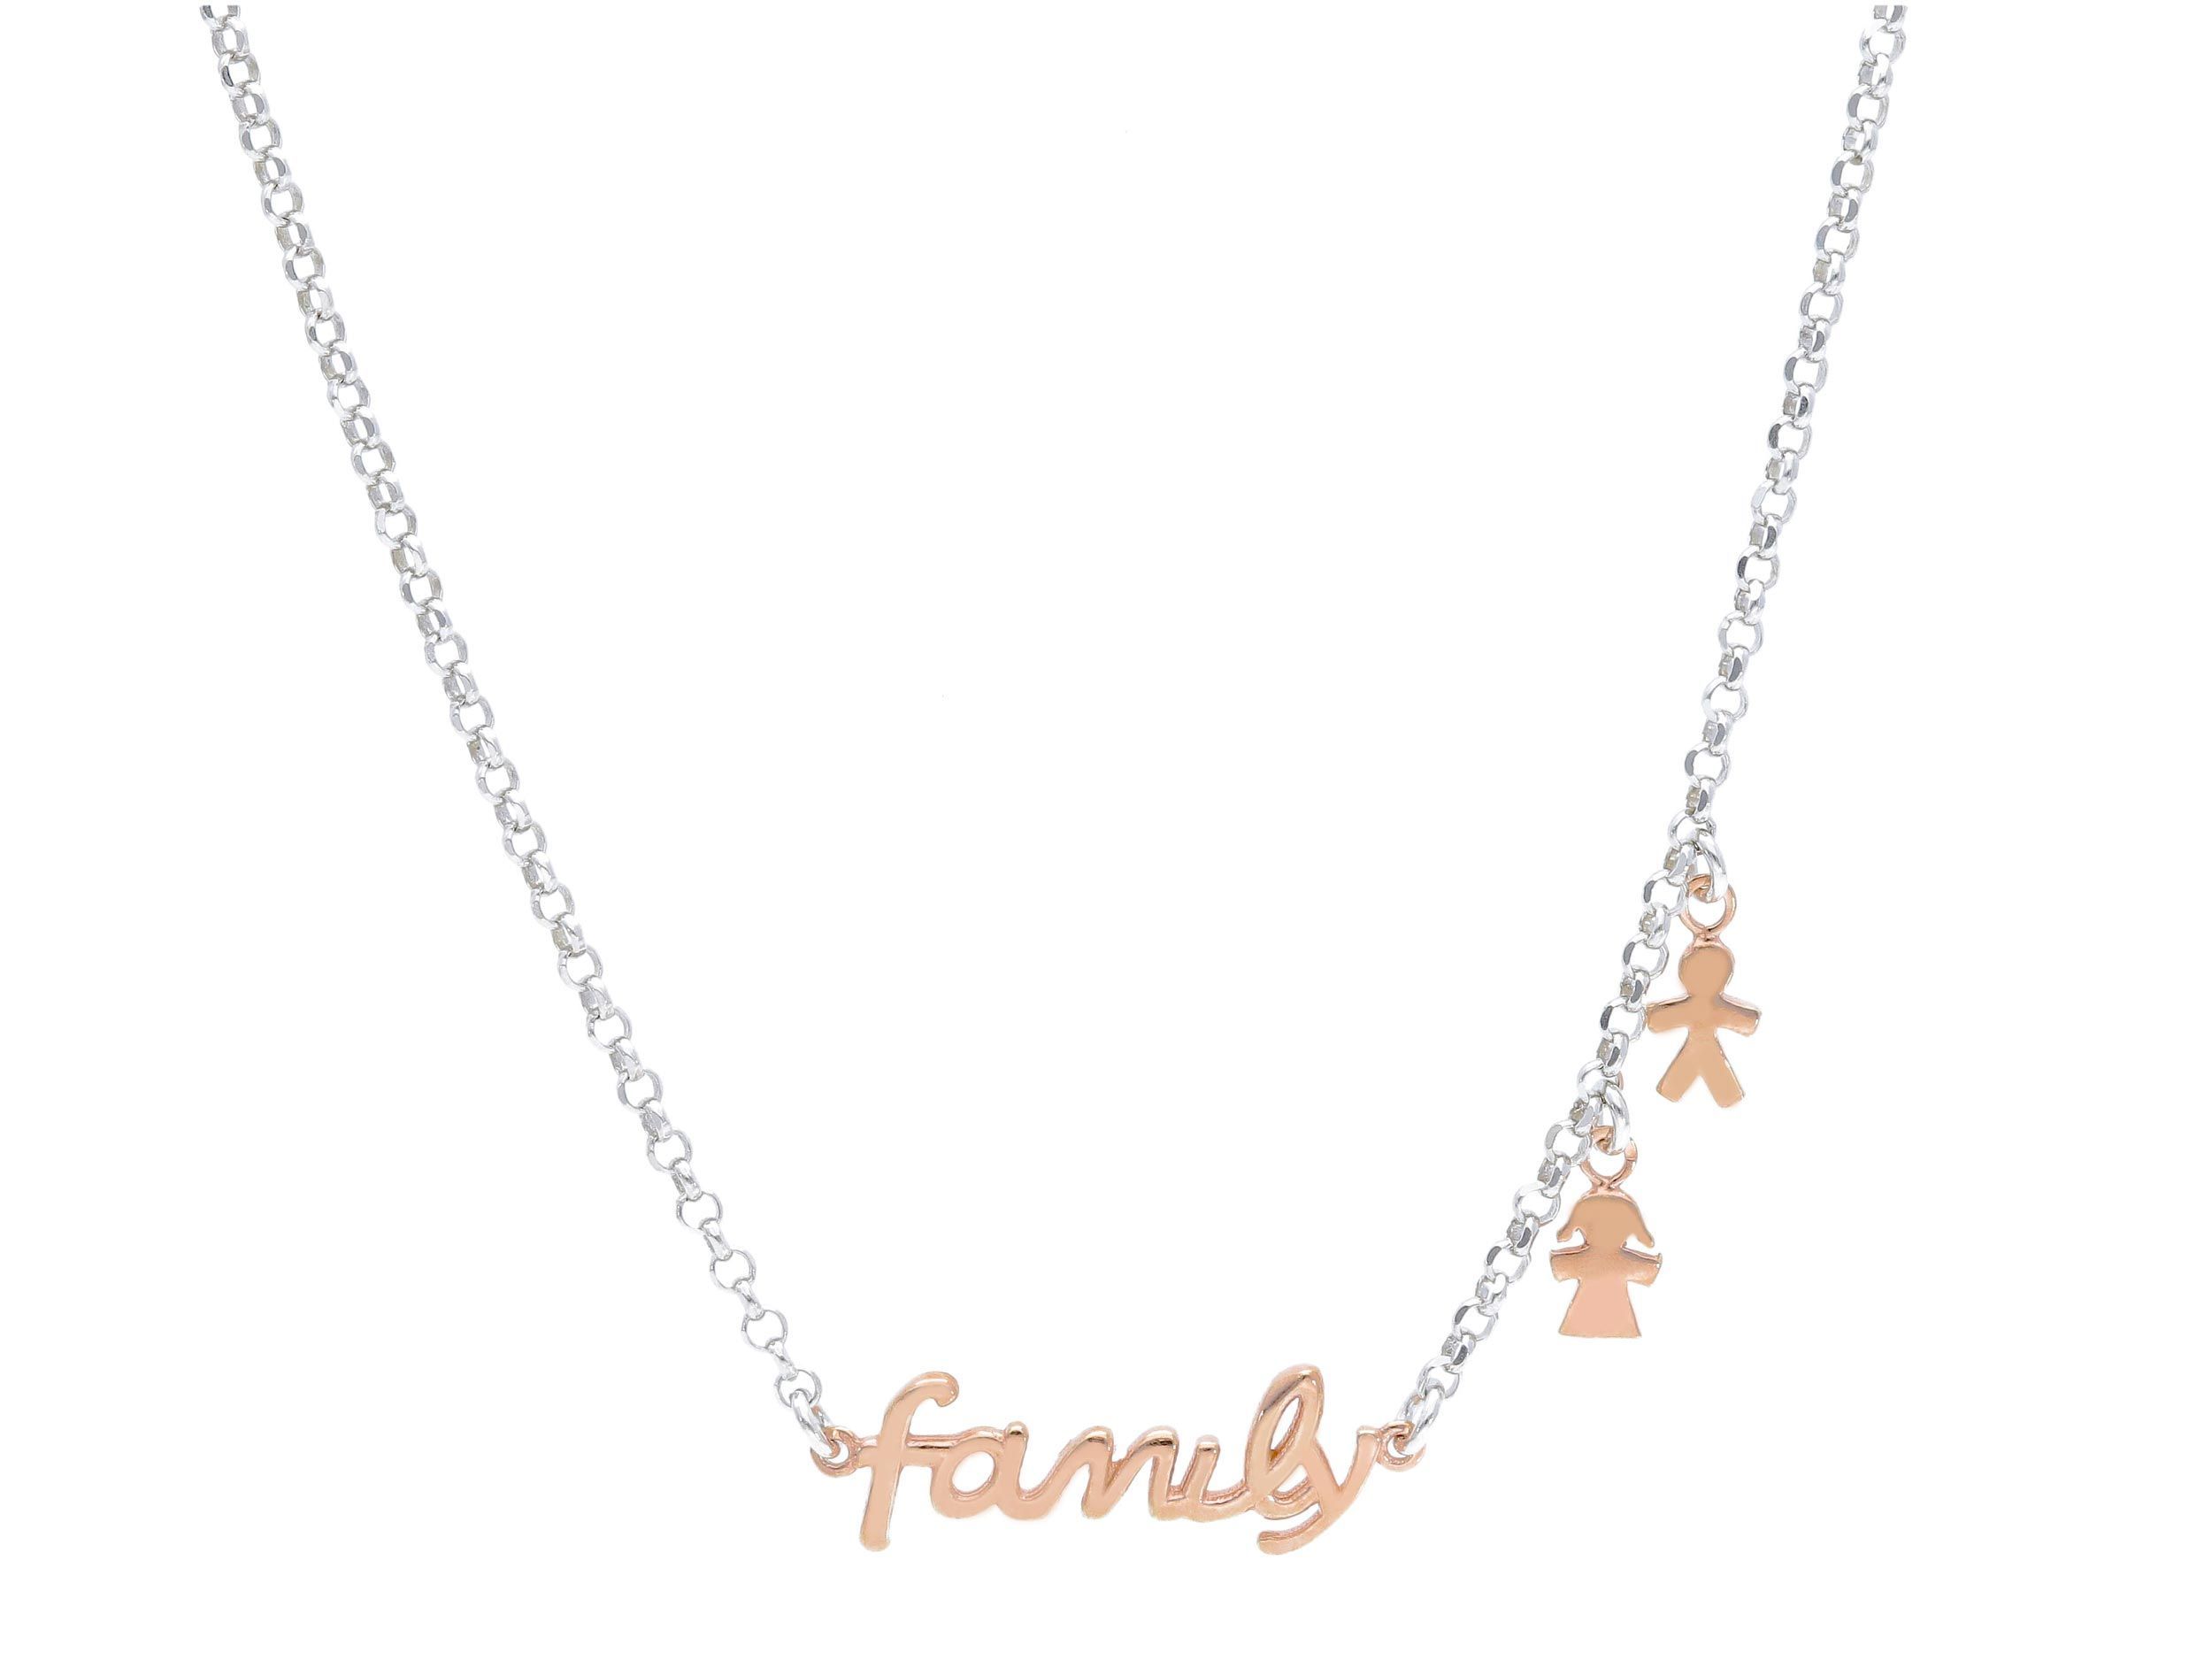  Platinum plated silver 925° necklace  (code S241516)